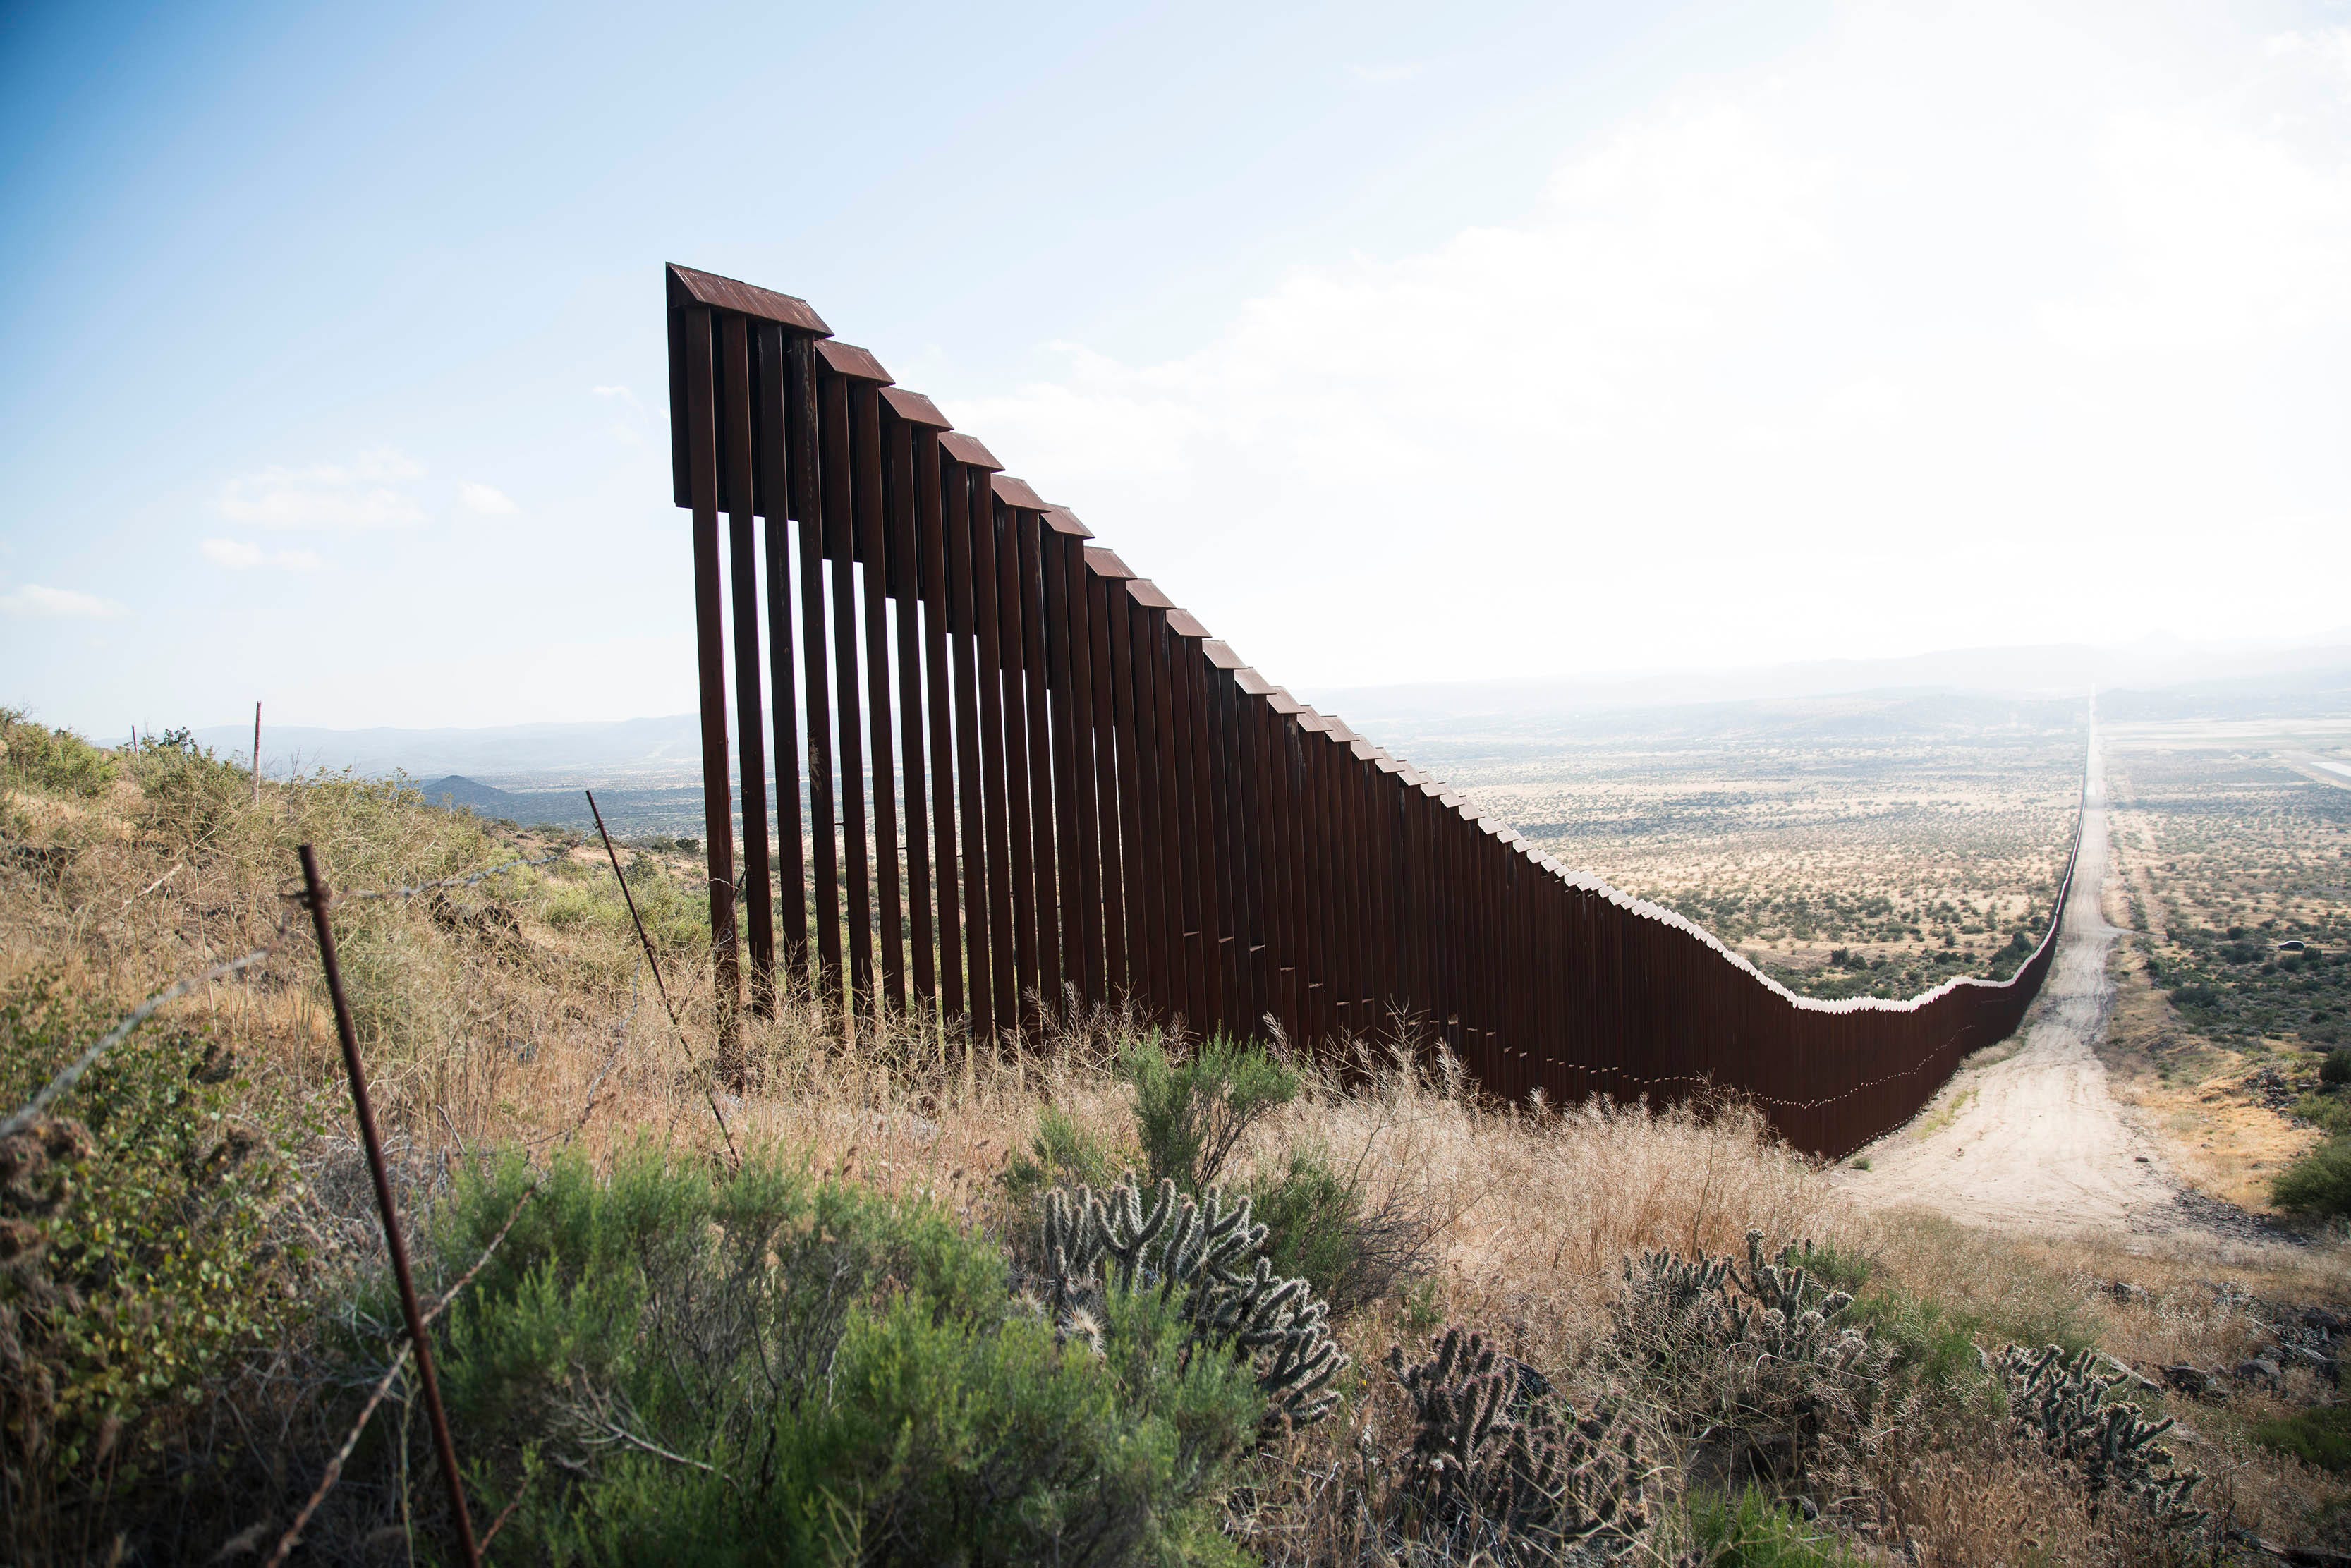 A gap in the U.S.-Mexico border fence is seen near Jacumba, East of San Diego California, United States. There is few gap like this fence in Nogales and near San Diego due to high terrain. President Trump is convincing American people that he will build the wall all along U.S.-Mexico border. 